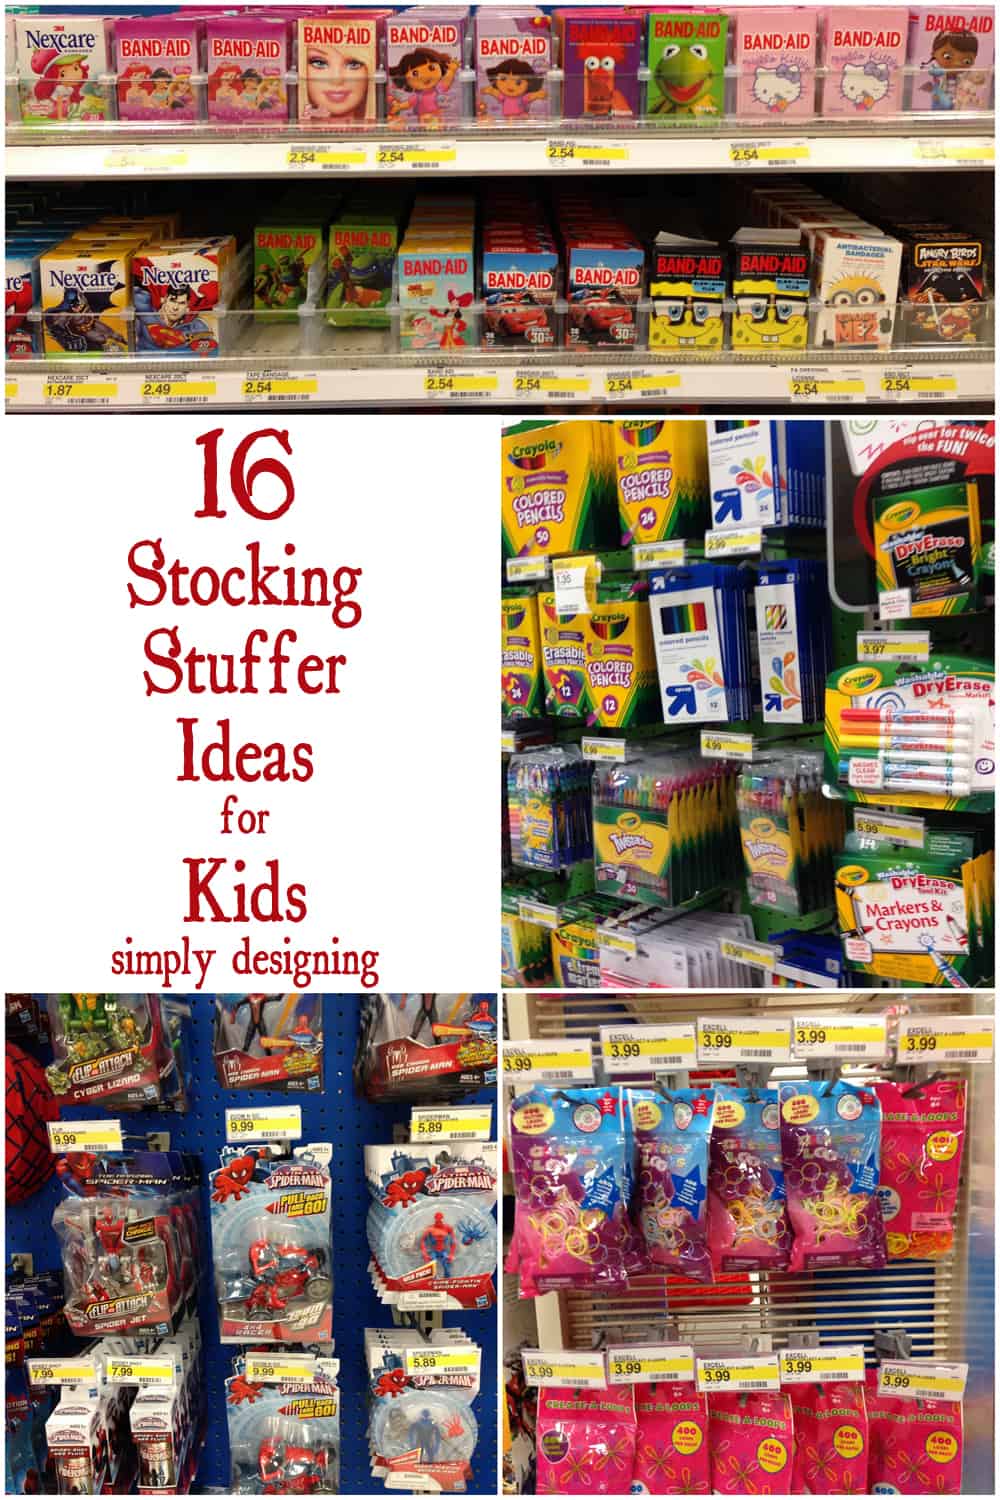 16+Stocking+Stuffer+Ideas+for+Kids1 | Stocking Stuffers for Kids + Target Giveaway #MyKindOfHoliday | 1 |